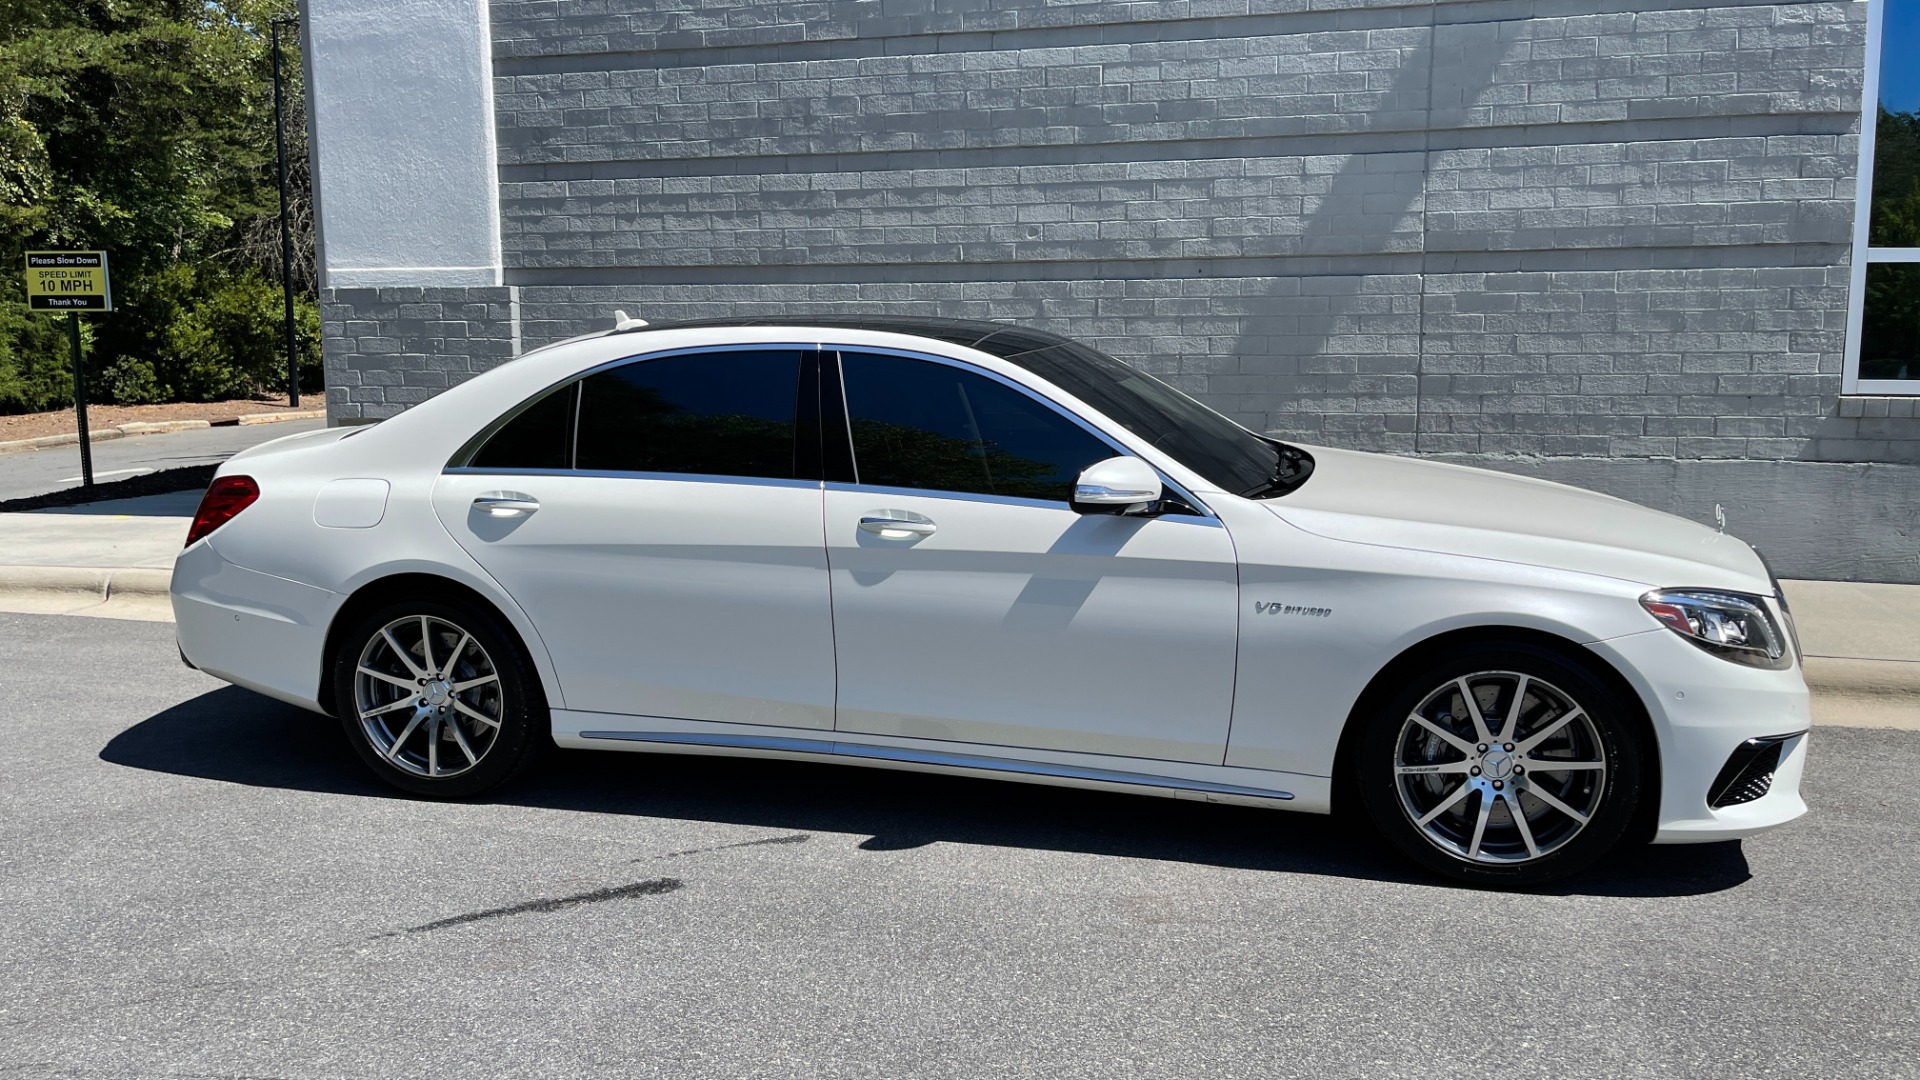 Used 2016 Mercedes-Benz S-Class AMG S63 / EXCLUSIVE TRIM / BURMESTER 3D HIGH END SOUND / DRIVER ASSISTANCE  for sale Sold at Formula Imports in Charlotte NC 28227 3